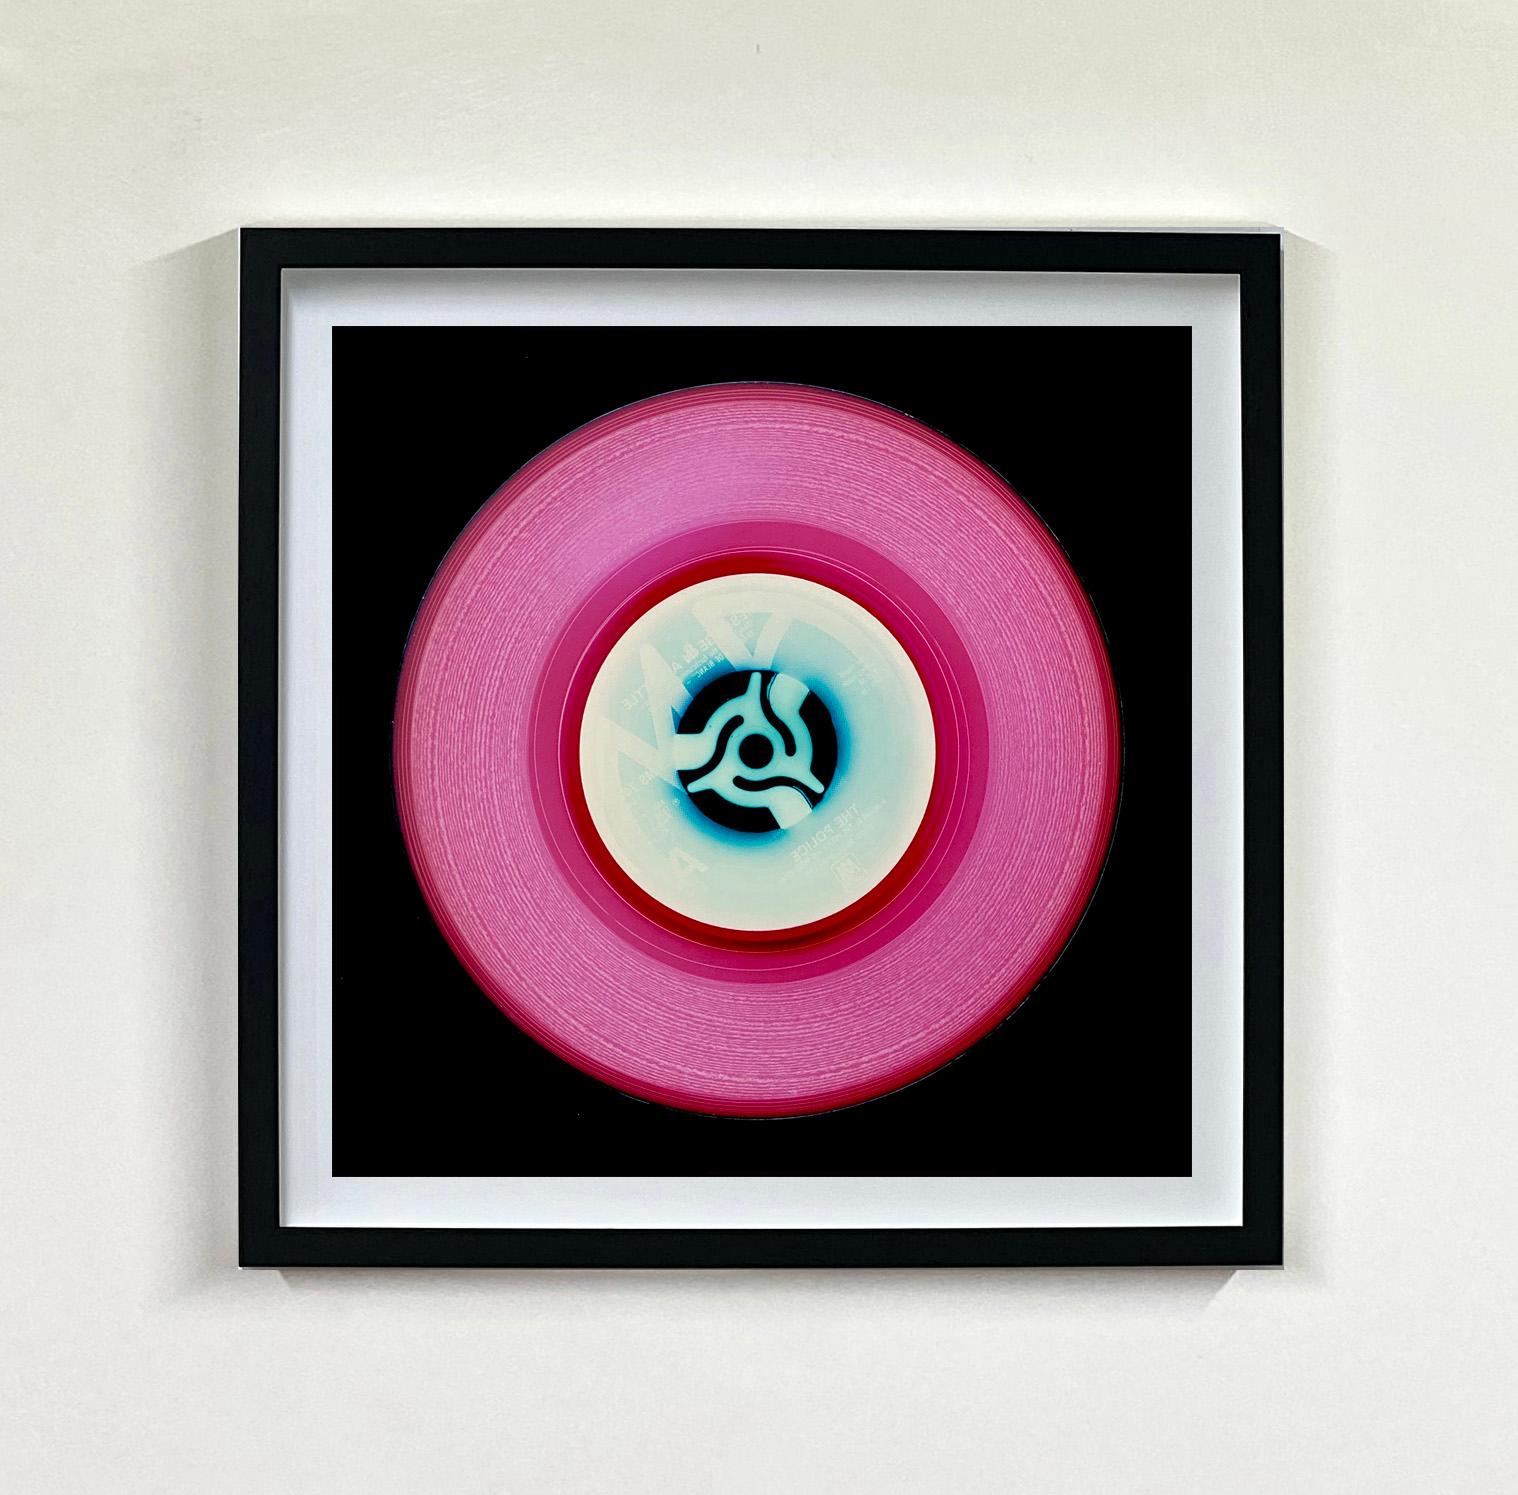 Vinyl Collection 20 Piece Multi-Color Installation - Pop Art Color Photography - Print by Heidler & Heeps